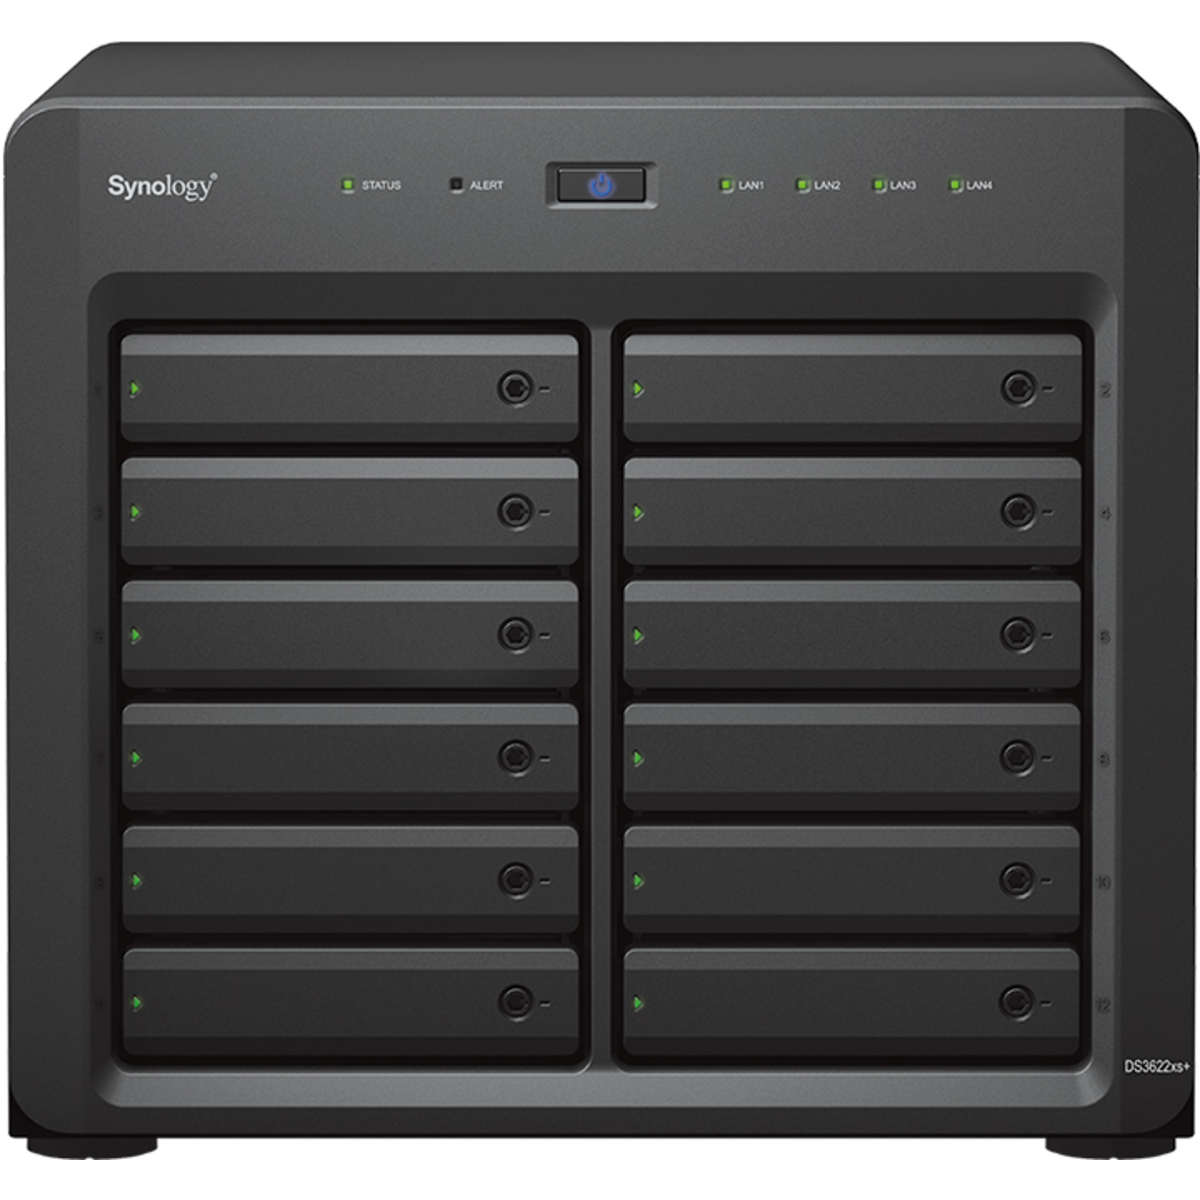 Synology DiskStation DS3622xs+ 44tb 12-Bay Desktop Multimedia / Power User / Business NAS - Network Attached Storage Device 11x4tb Synology Plus Series HAT3300-4T 3.5 5400rmp SATA 6Gb/s HDD NAS Class Drives Installed - Burn-In Tested DiskStation DS3622xs+